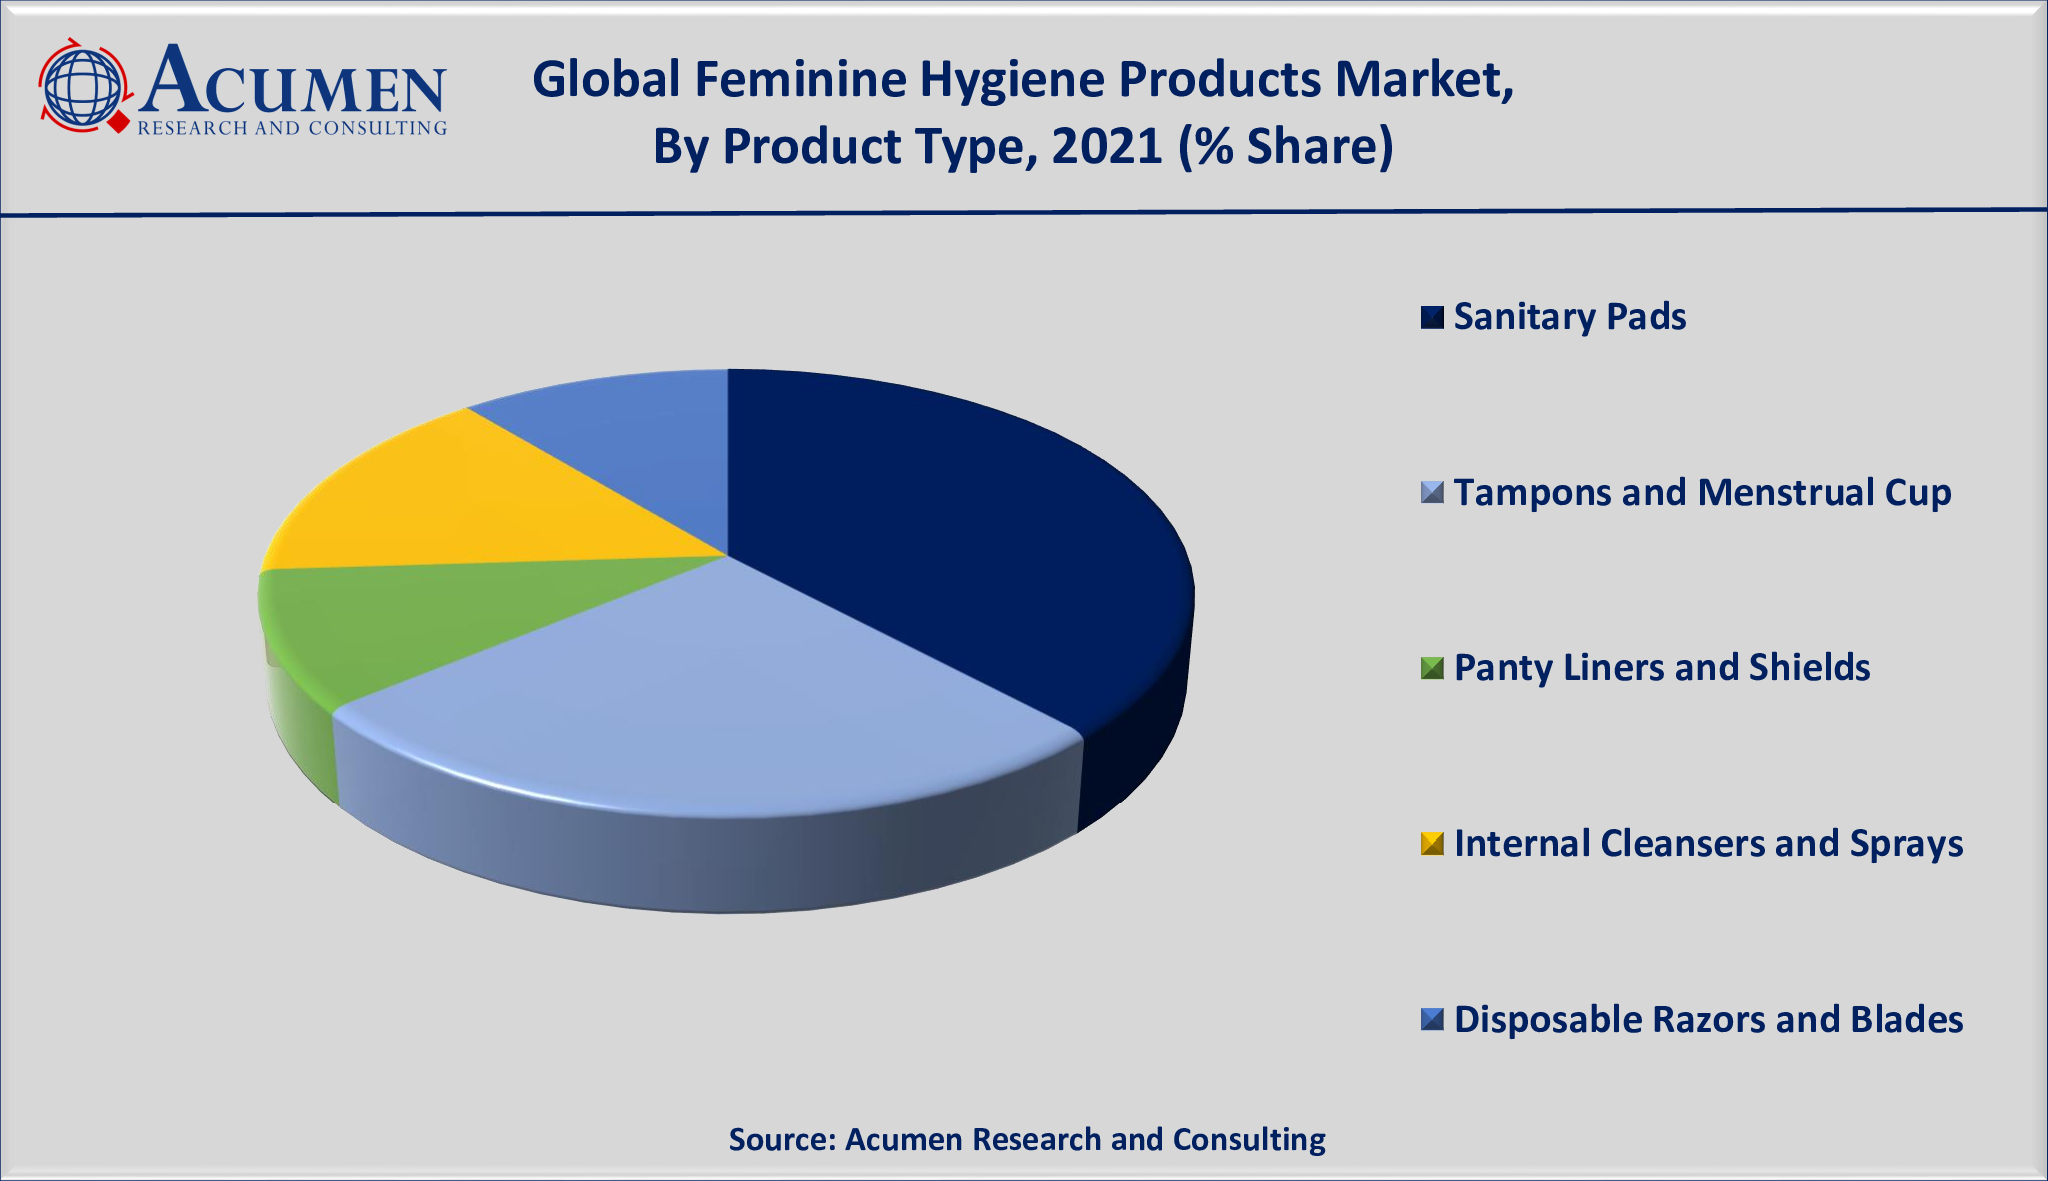 Feminine Hygiene Products Market Analysis is valued at USD 39,107 Million in 2021 and is projected to reach a market size of USD 69,853 Million by 2030; growing at a CAGR of 6.8%.